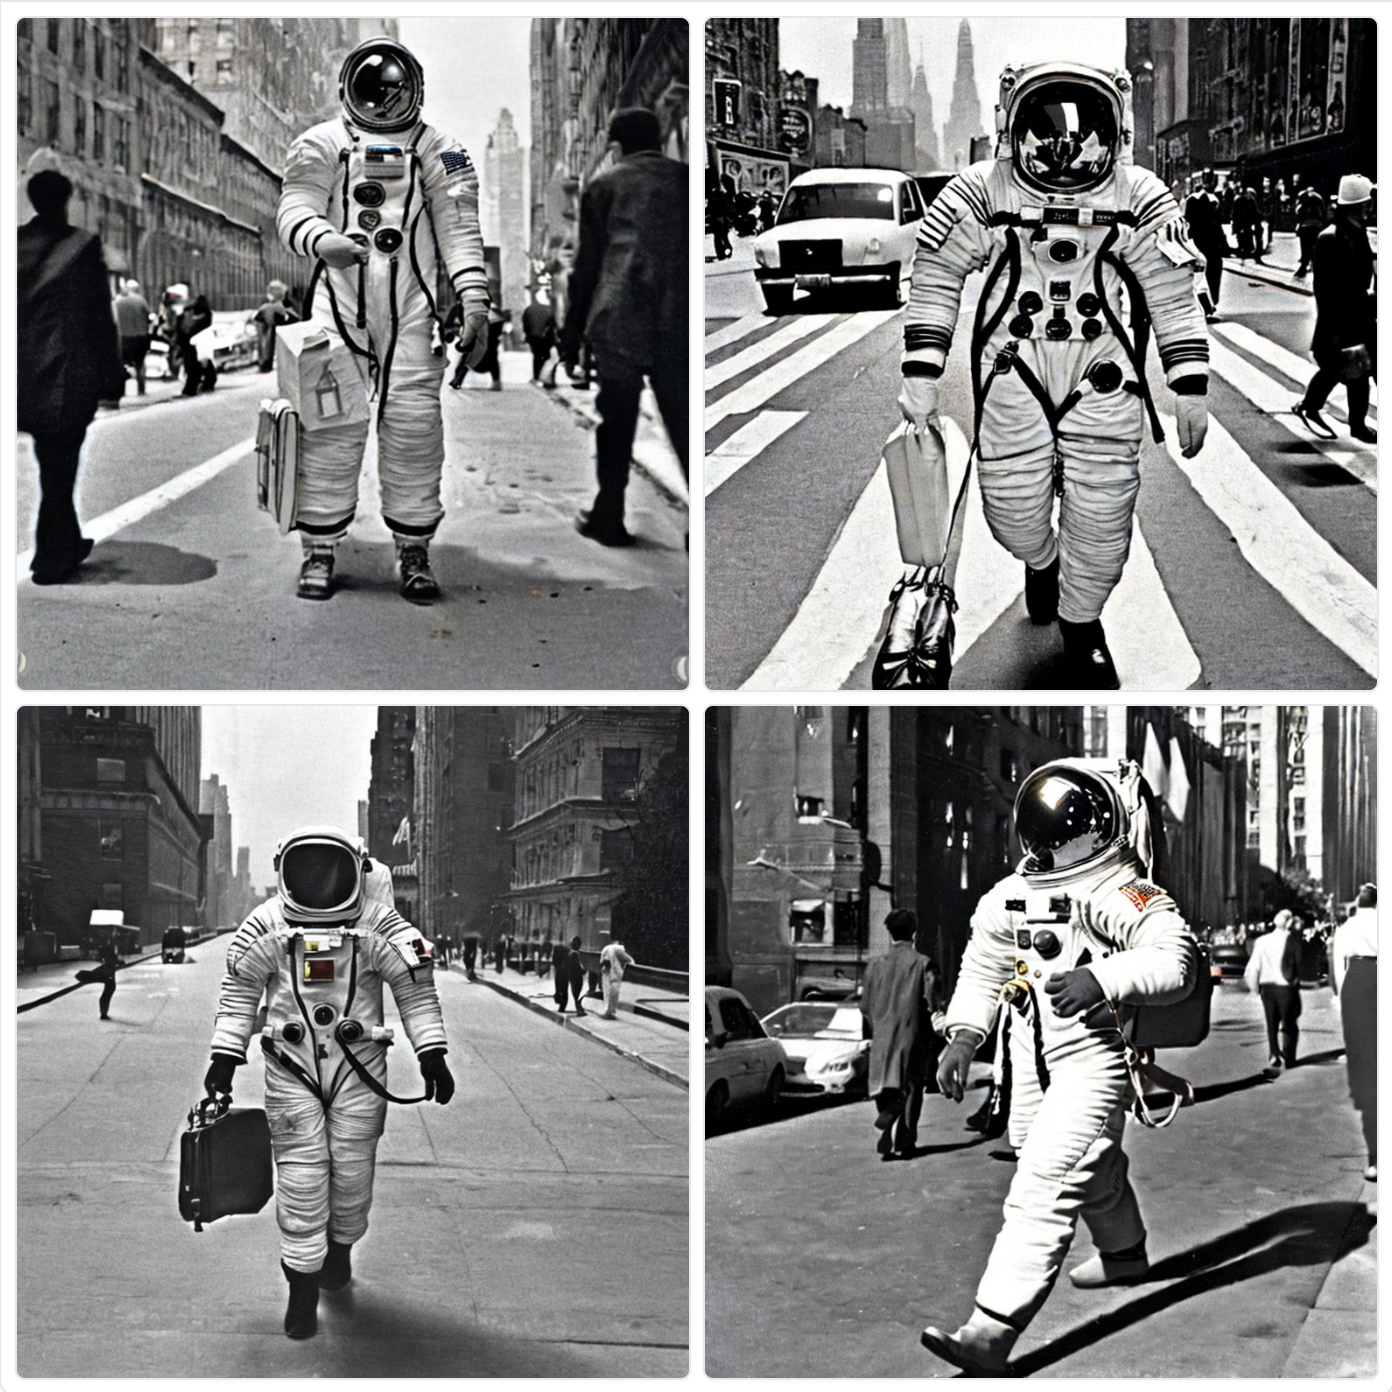 4 images of an astronaut walking through retro New York holding a bag